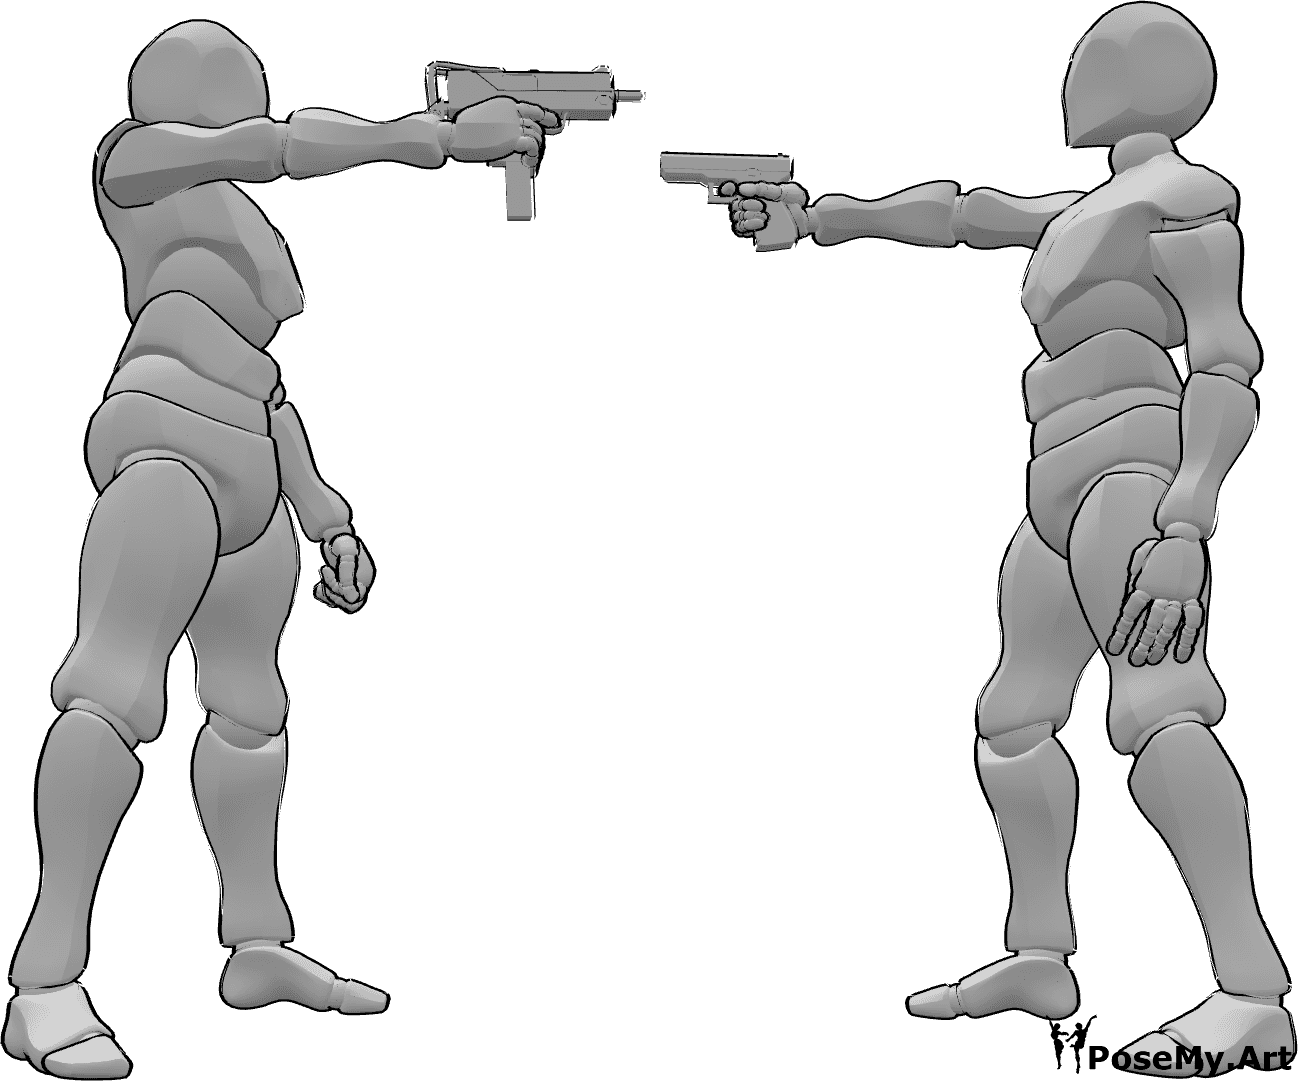 Pose Reference- Males aiming guns pose - Two male is aiming their guns at each other